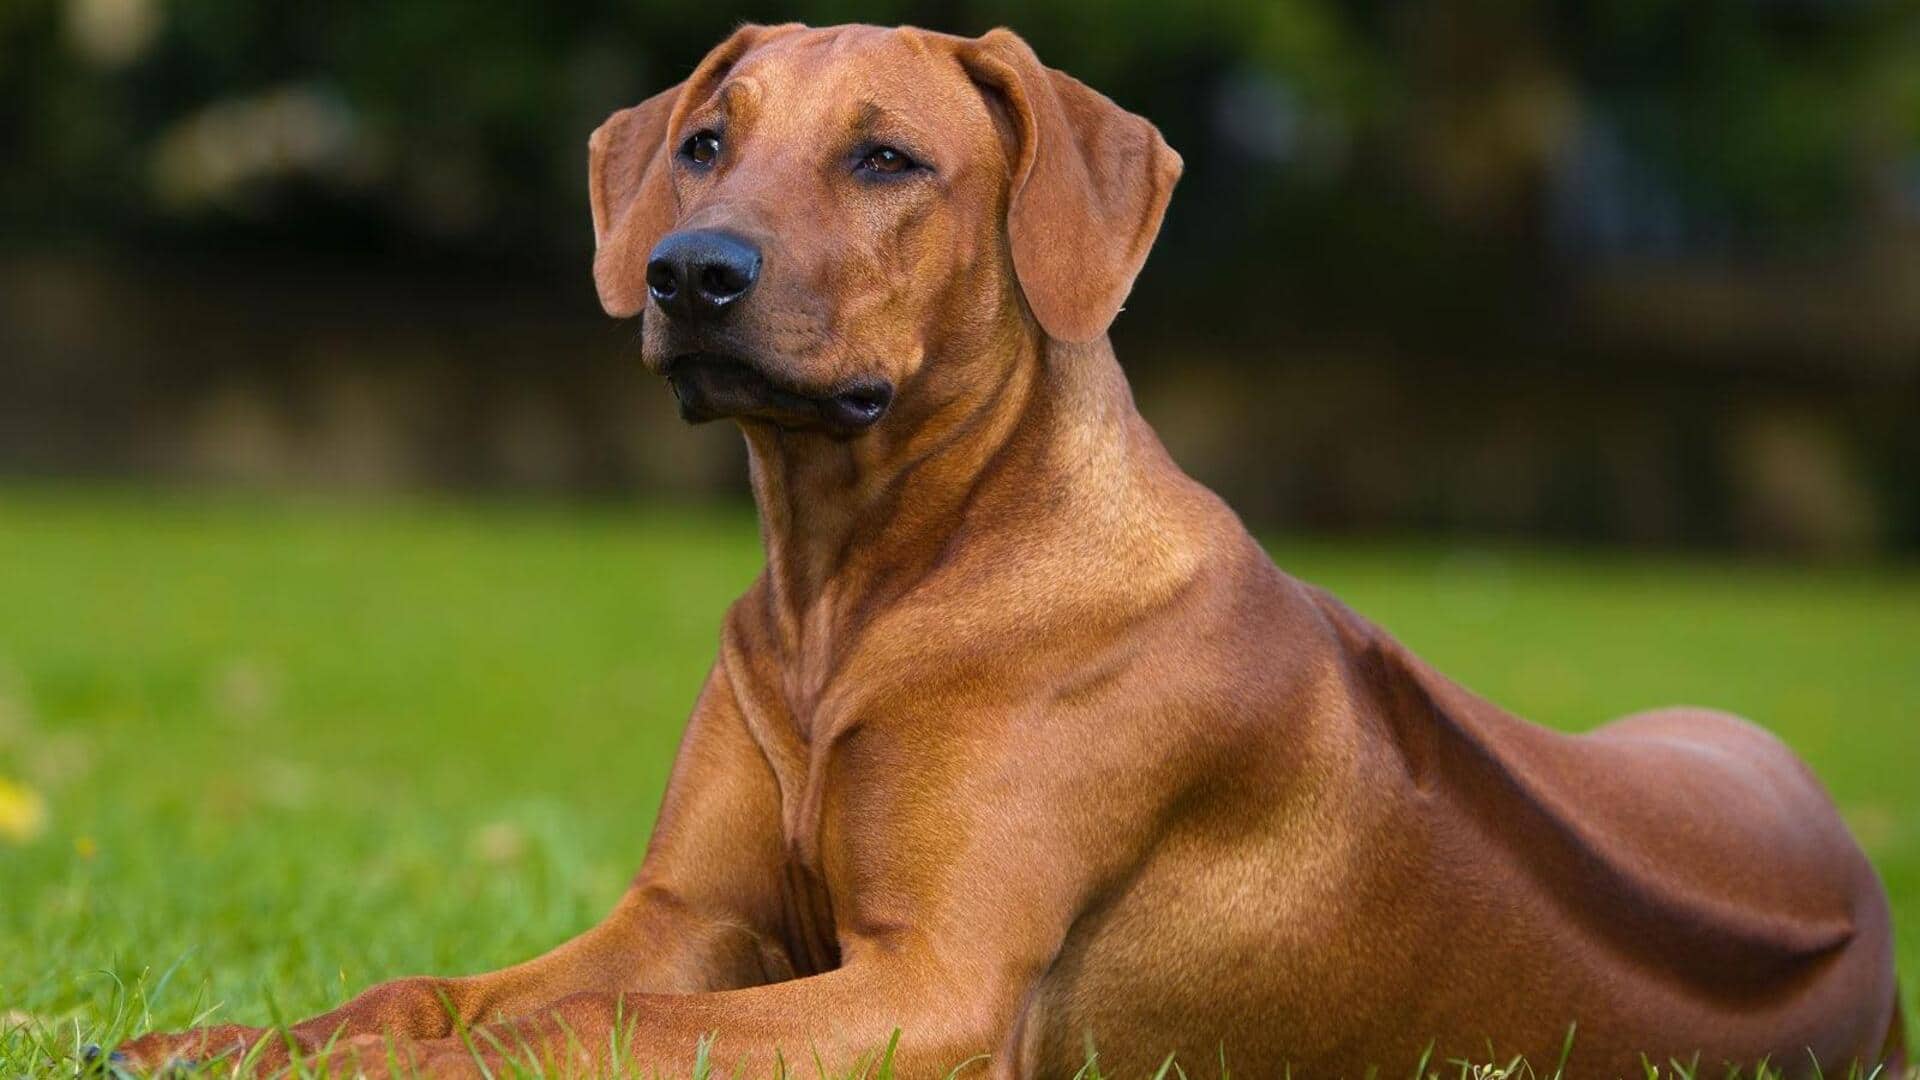 Got a Rhodesian Ridgeback at home? Follow these care tips